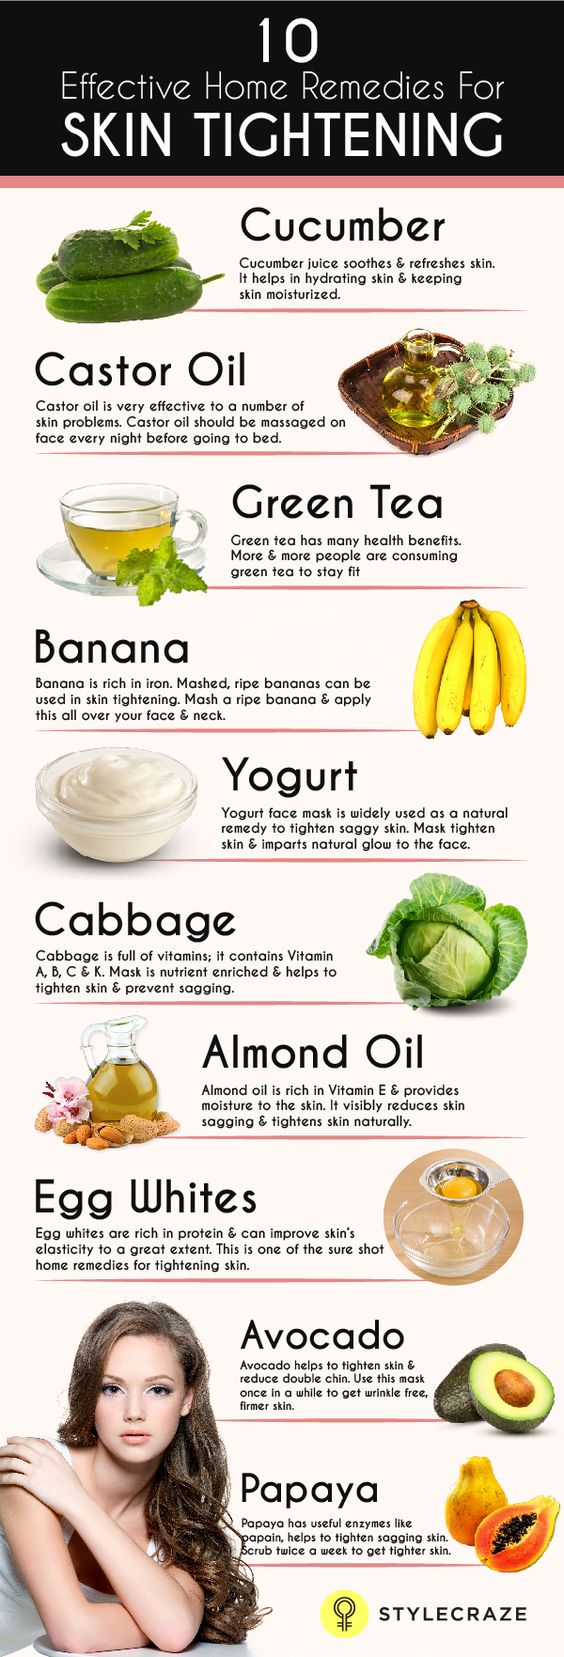 23 Effective Home Remedies For Skin Tightening